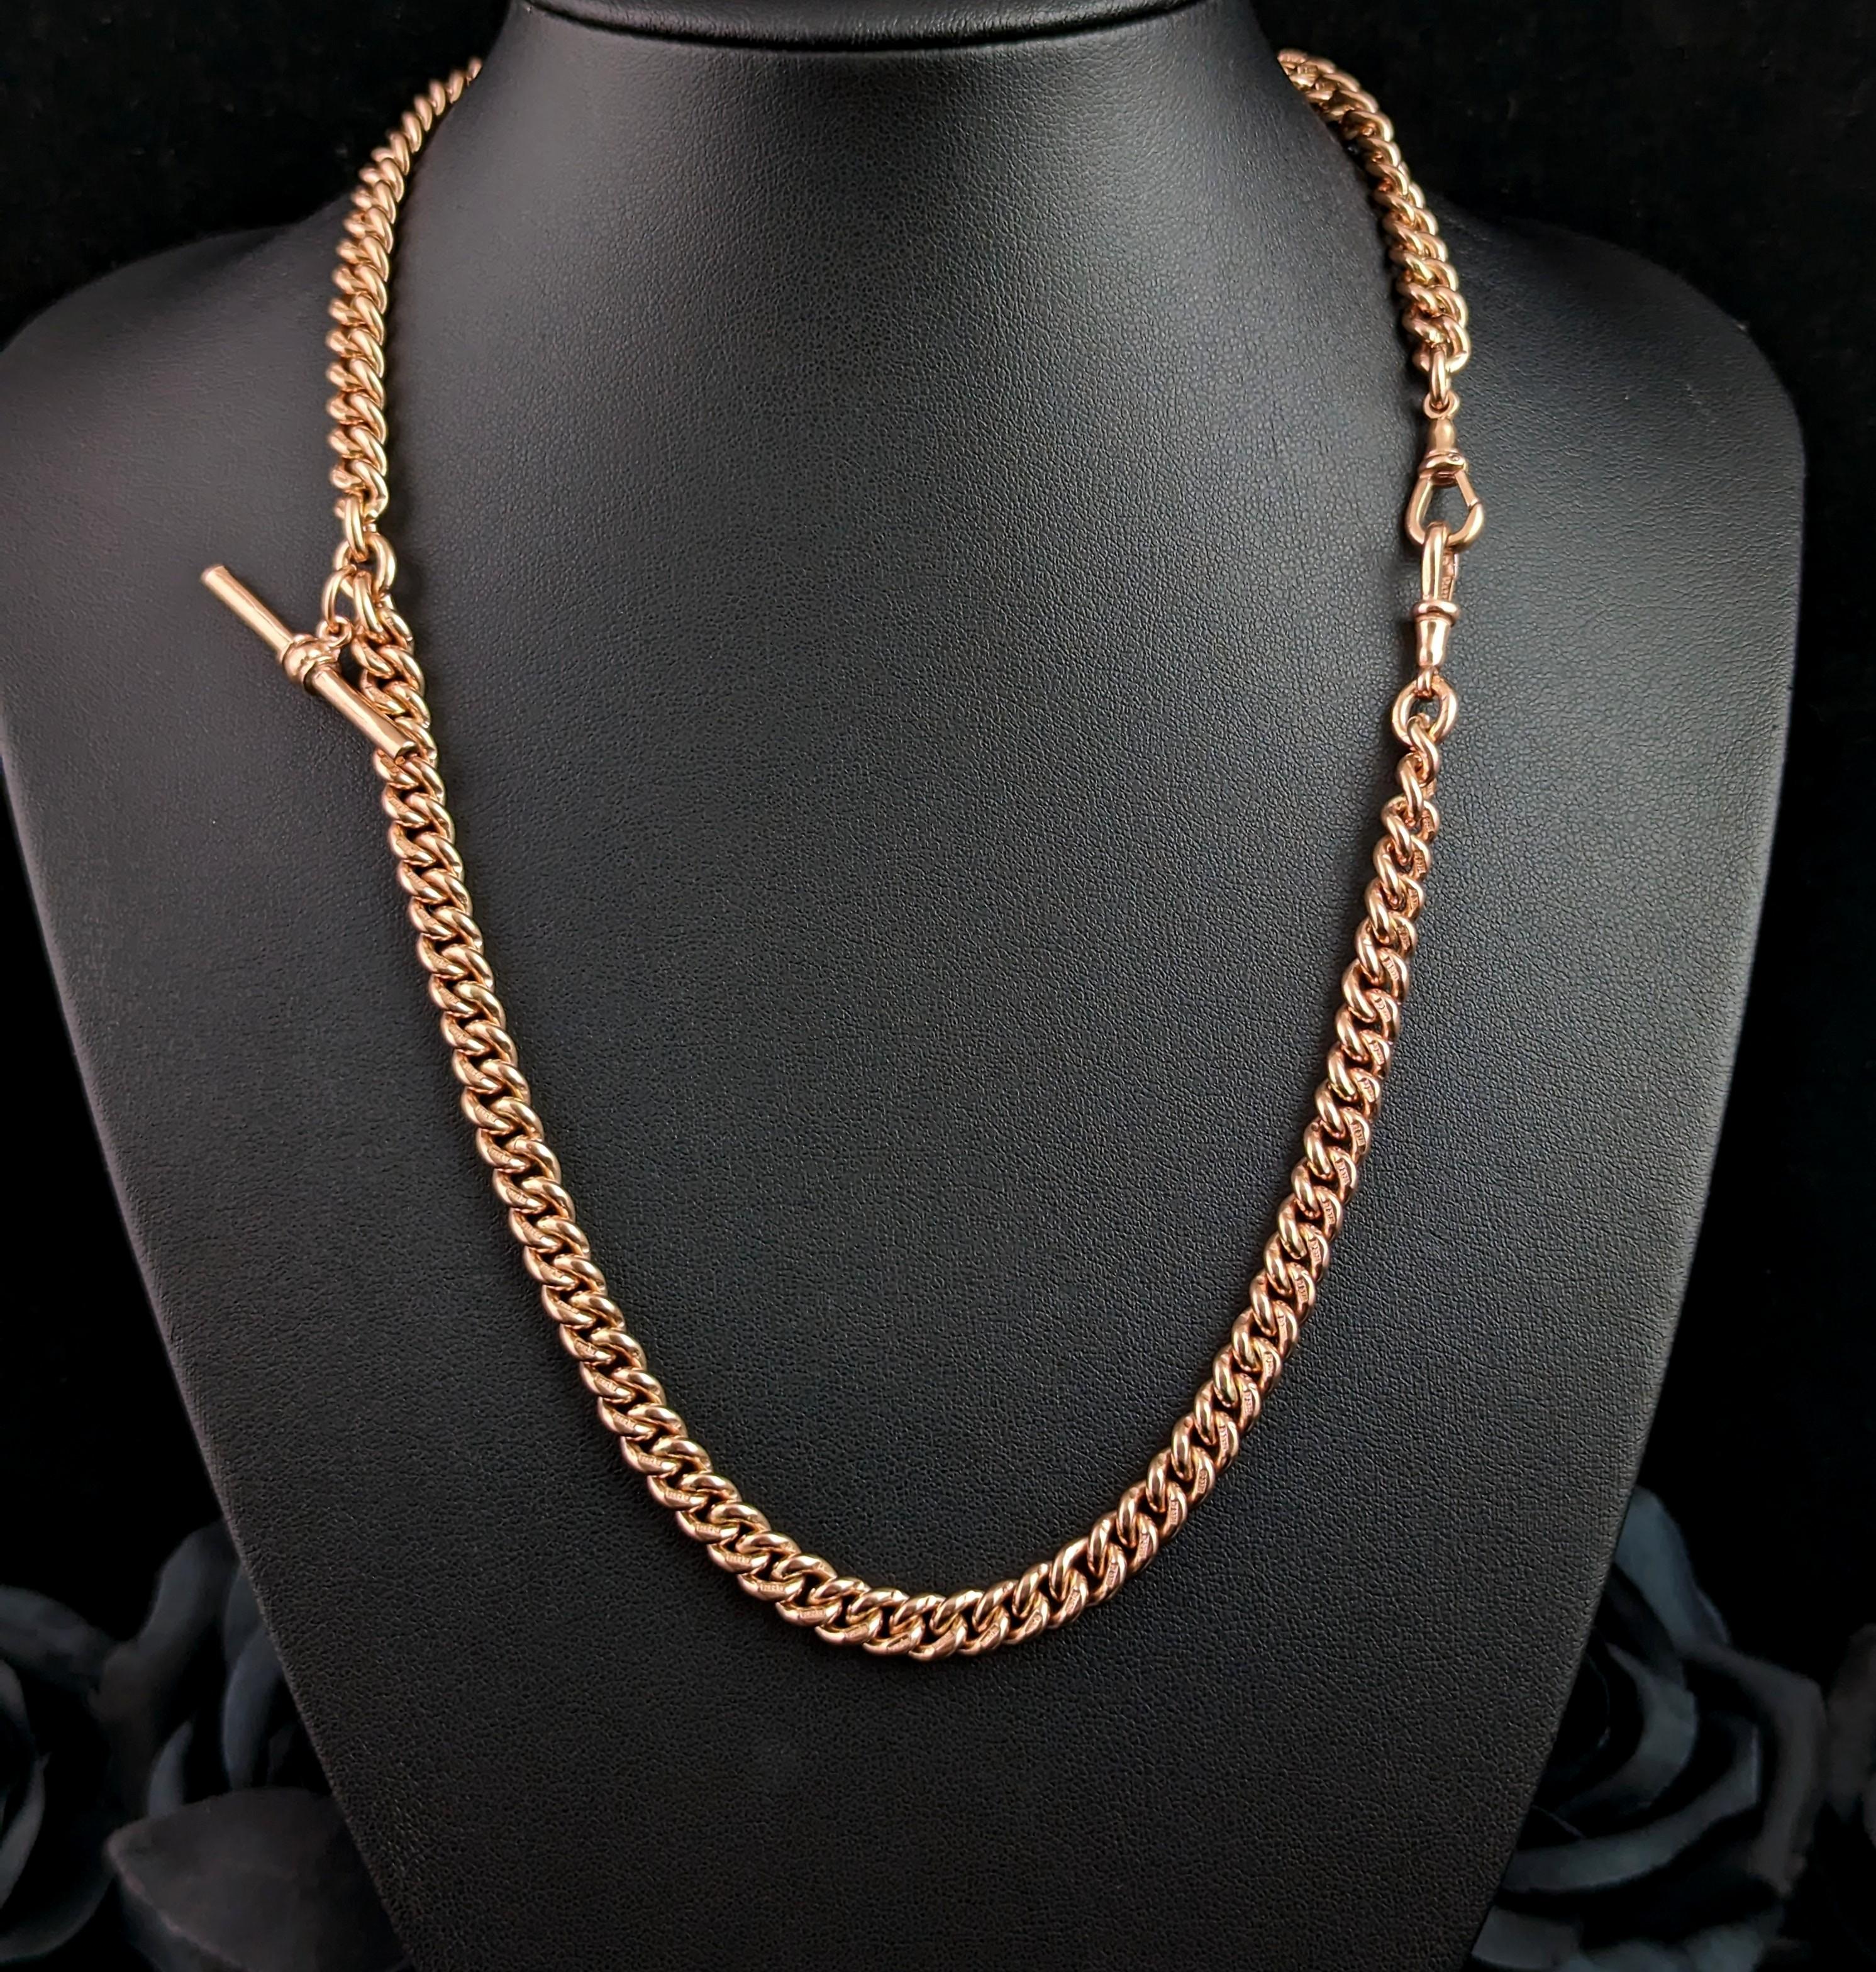 We adore a good antique gold Albert chain here at StolenAttic and I'm not joking when I say this one is really the mother of all chains!

It has everything you could ever wish for in an antique gold Albert chain, the weight, fine craftsmanship, the